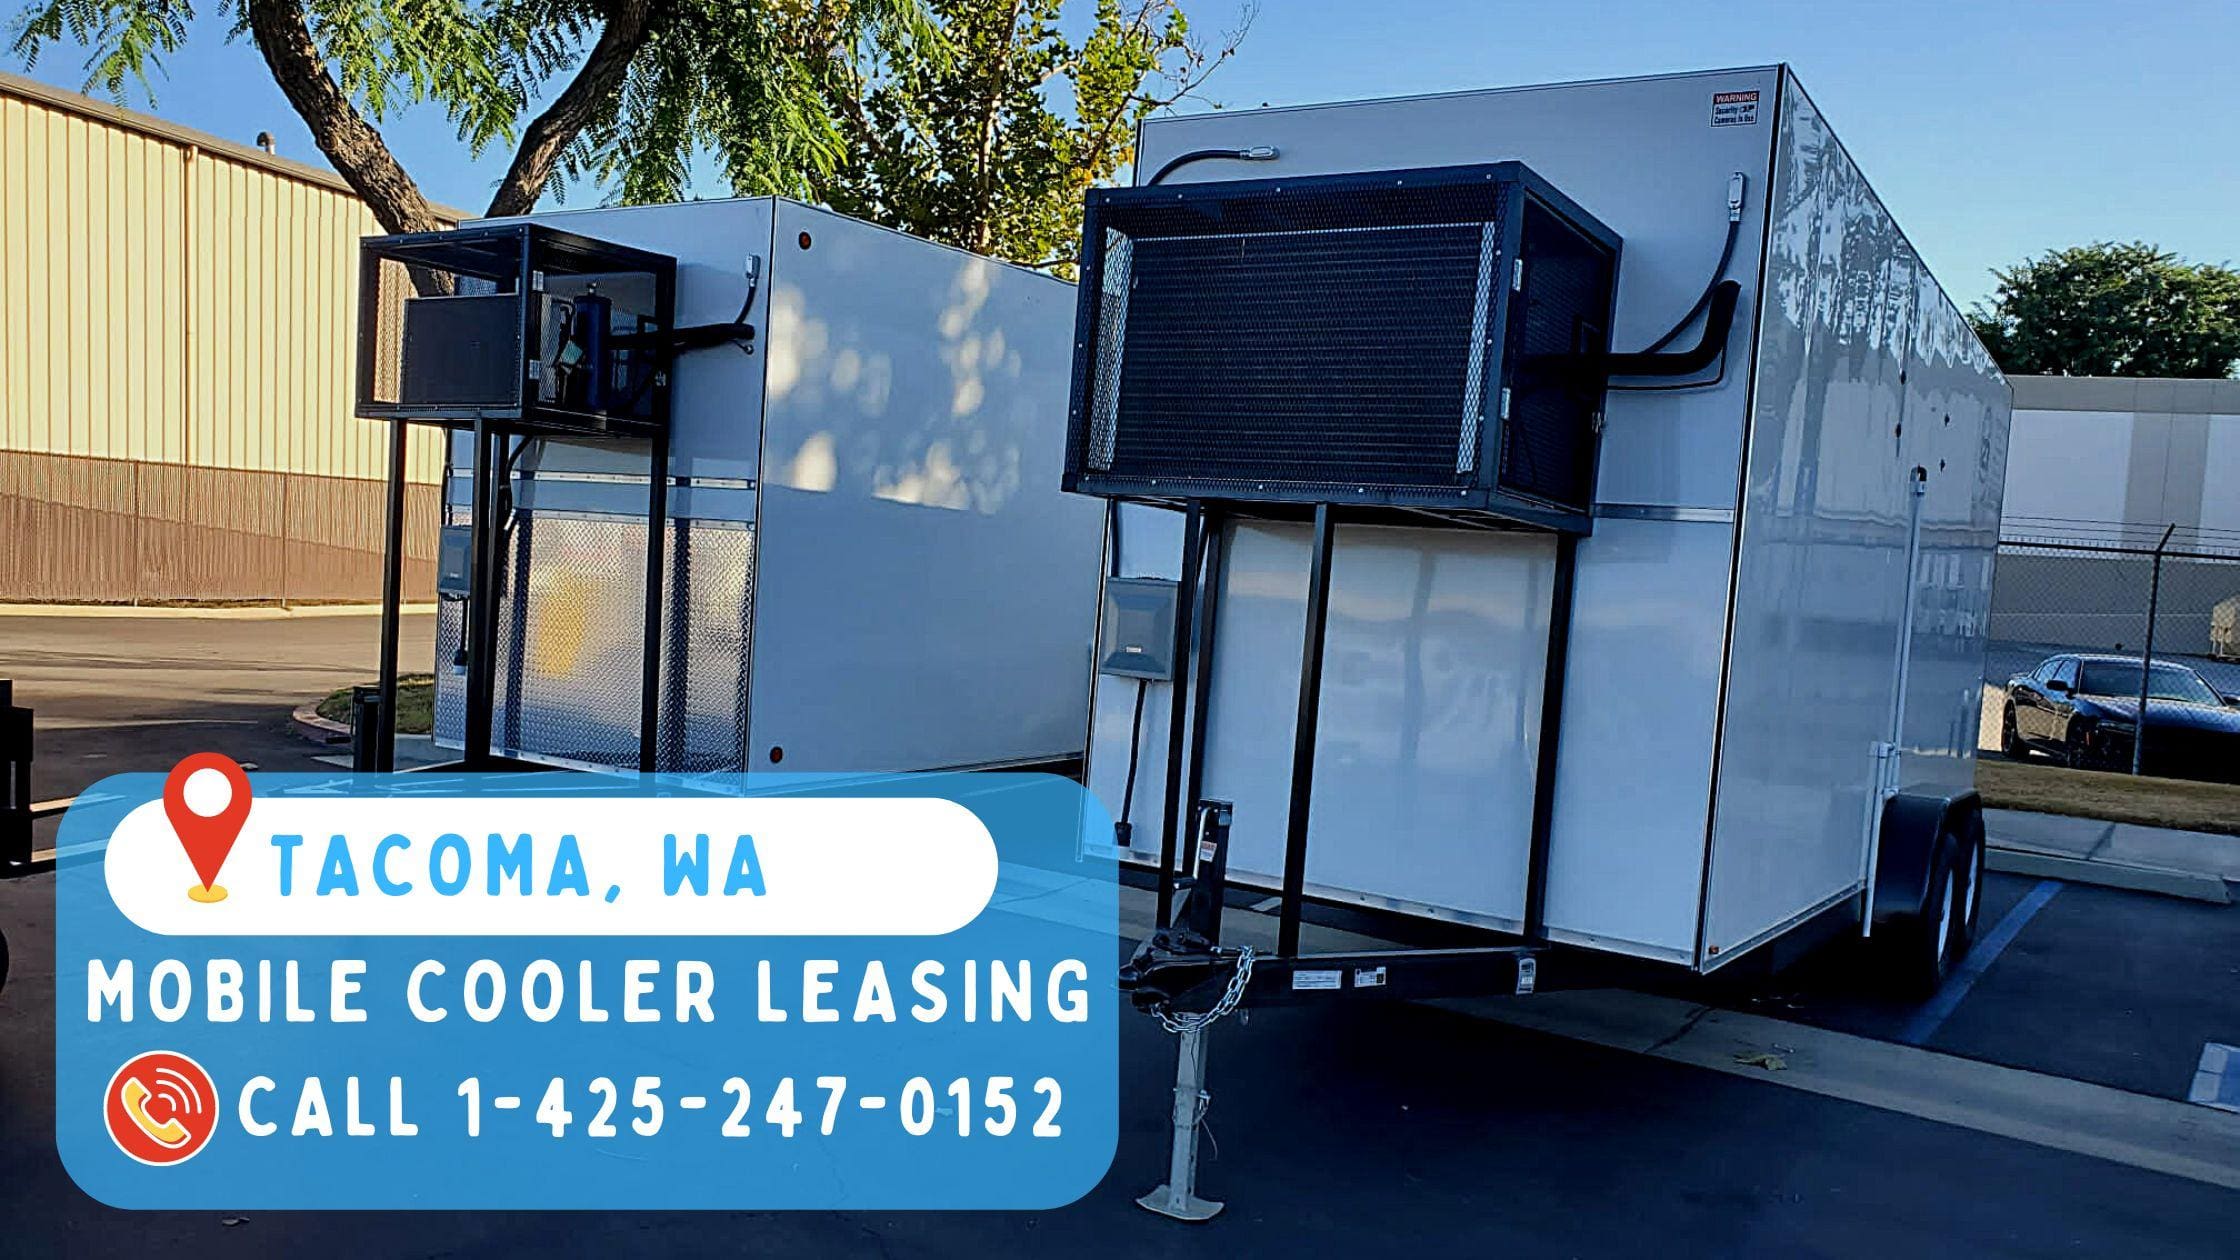 Mobile Cooler Leasing in Tacoma